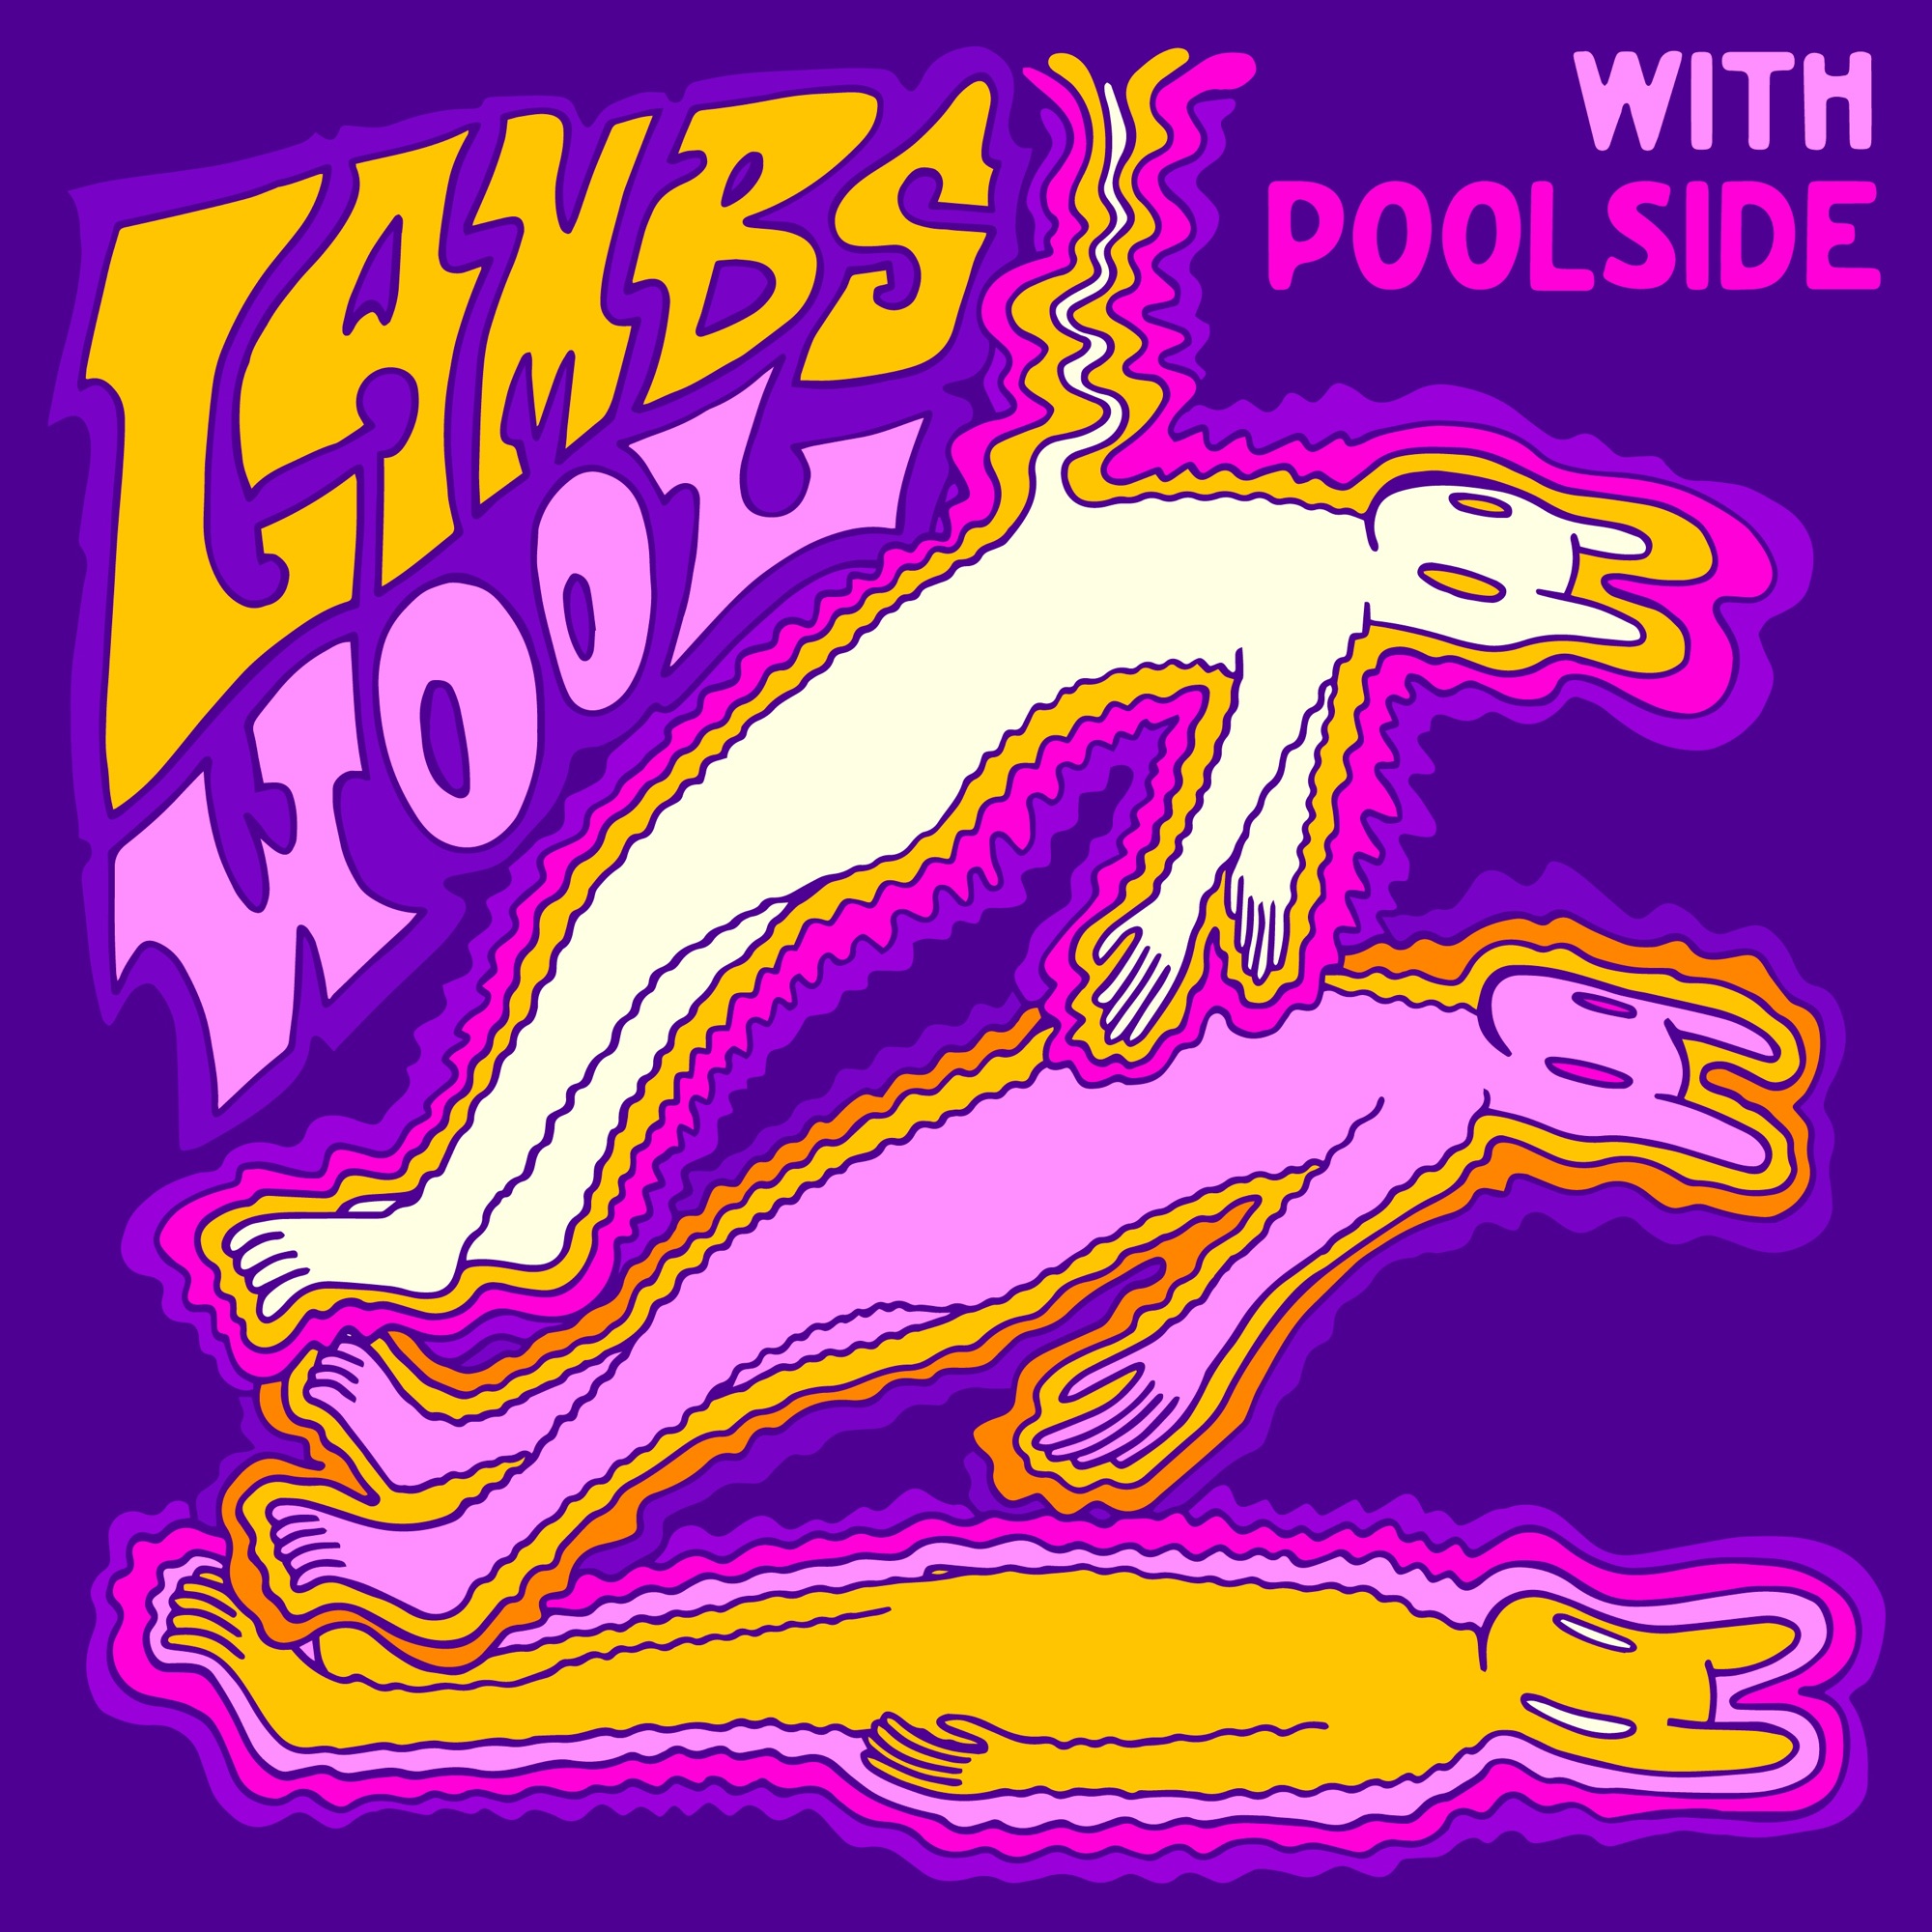 Foster the People & Poolside - Lamb's Wool (with Poolside) - Single